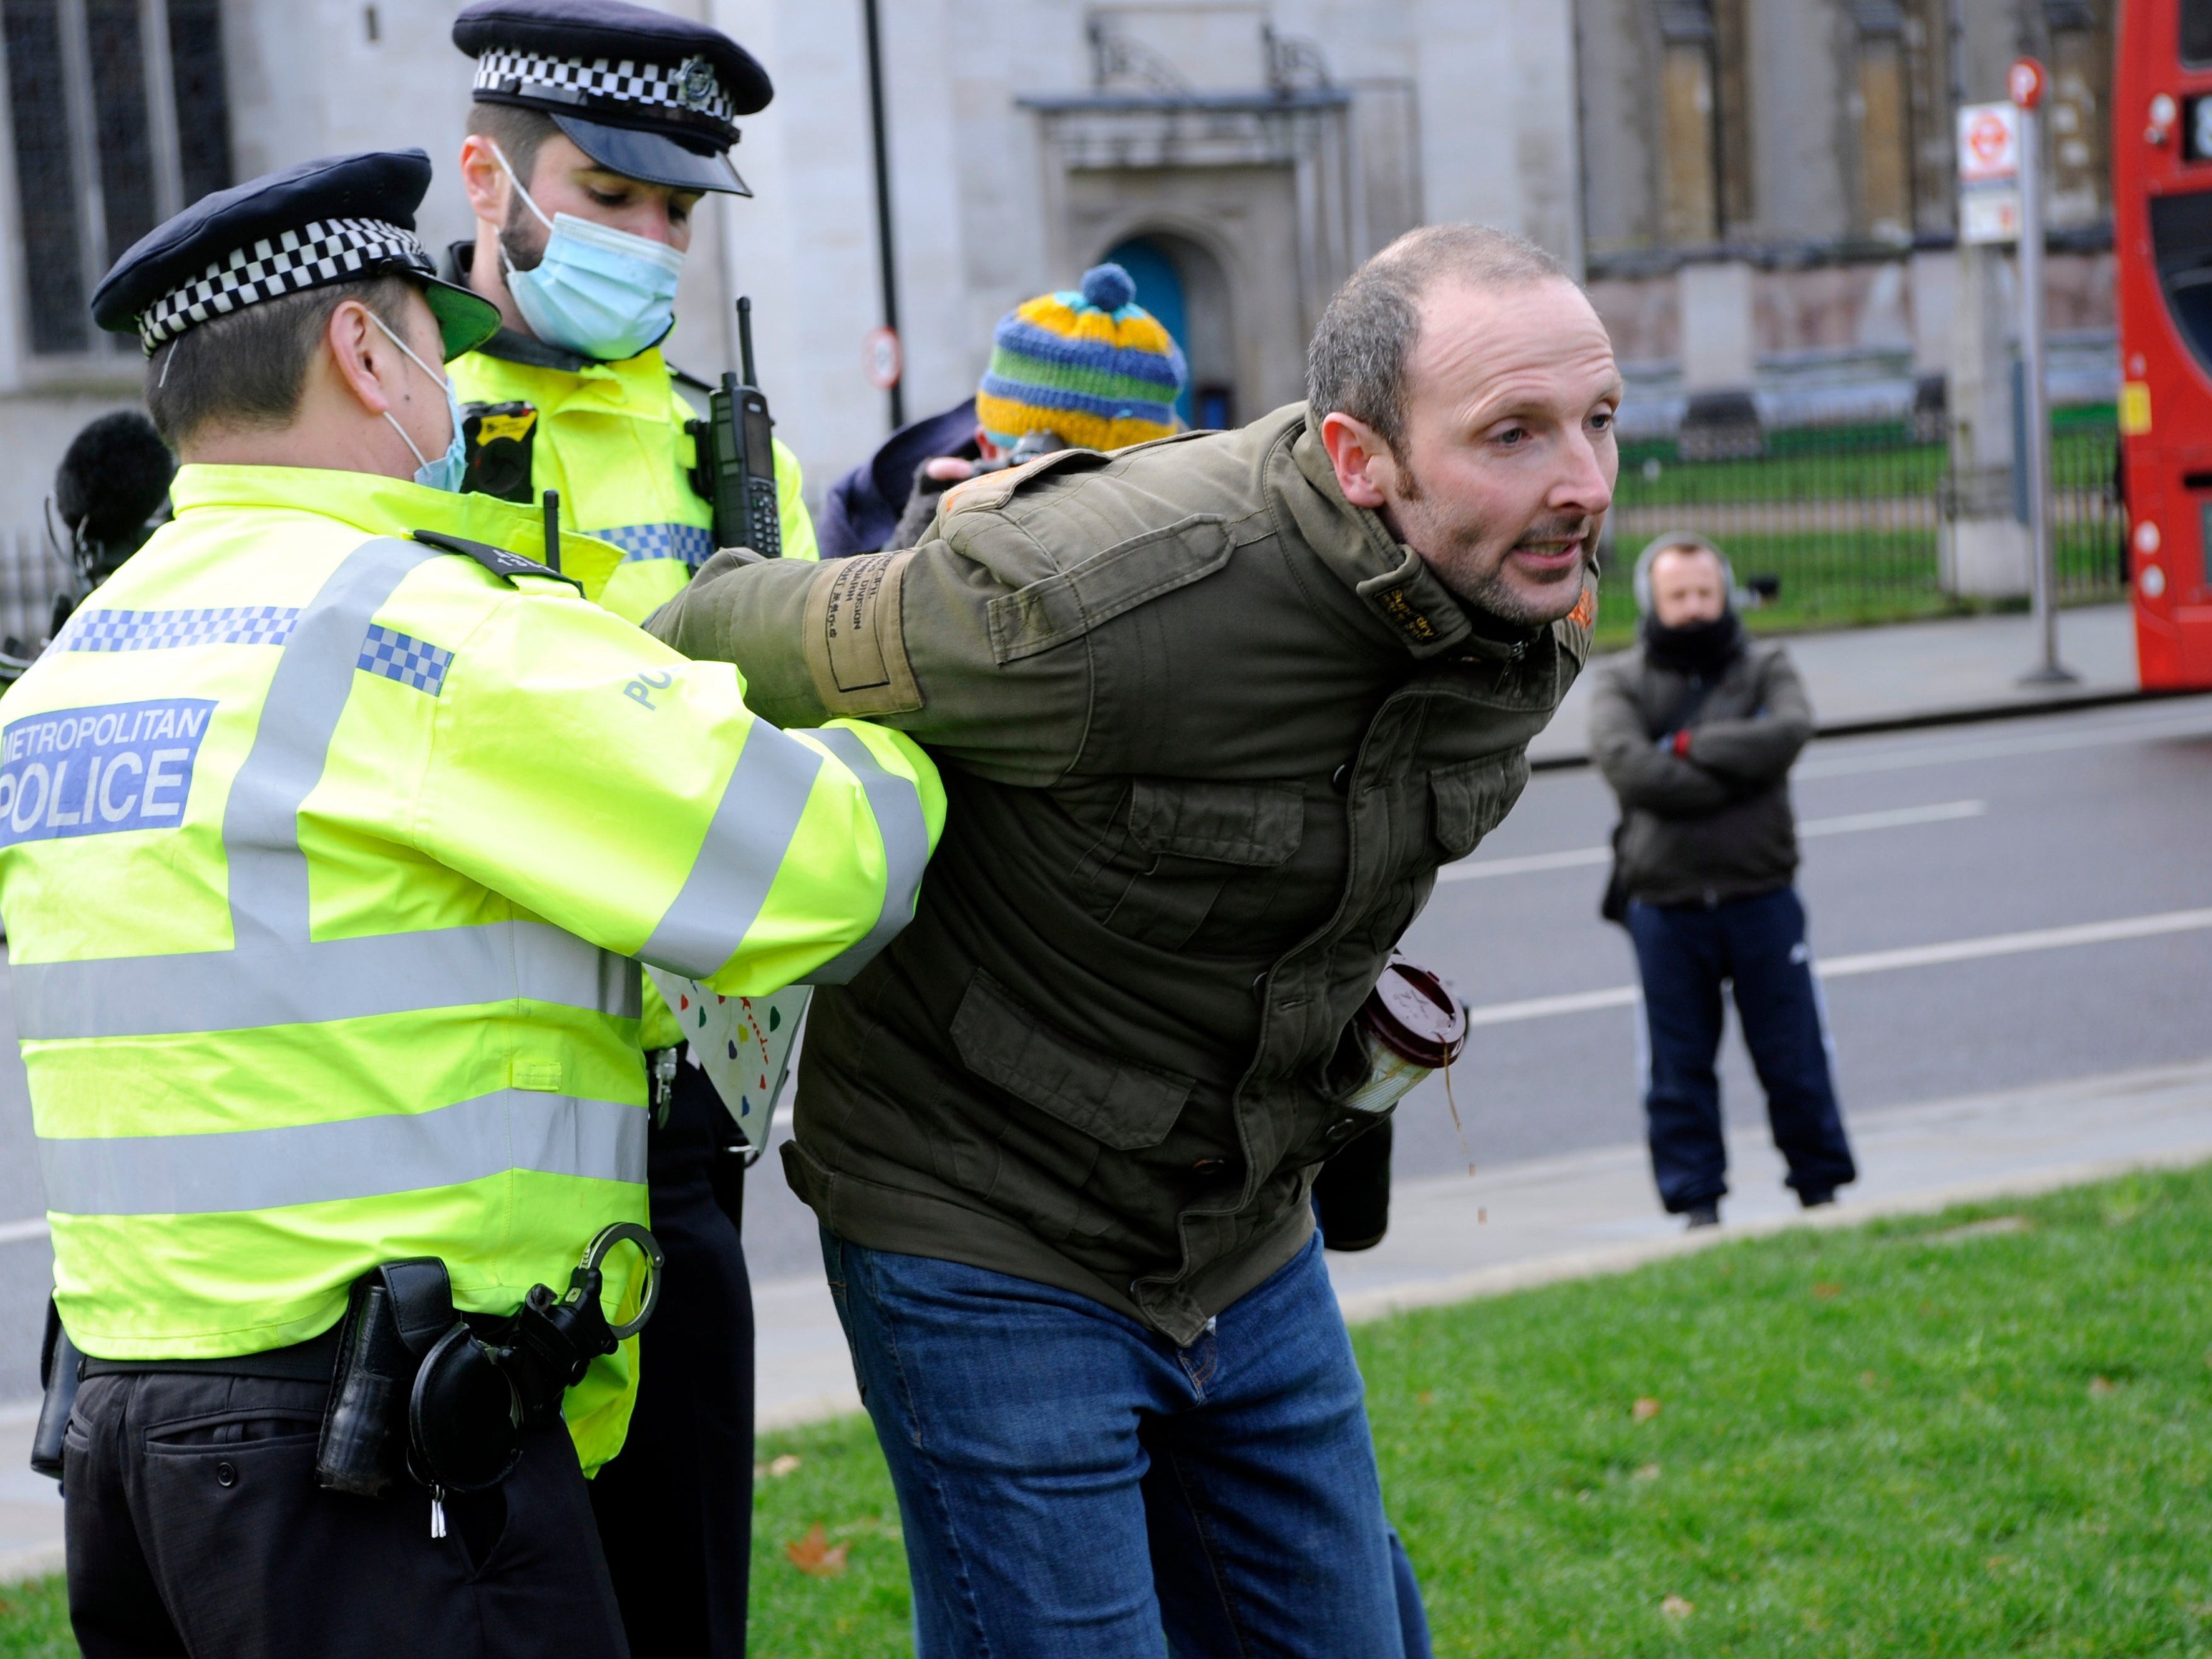 A demonstrator is apprehended at an anti-lockdown protest in central London